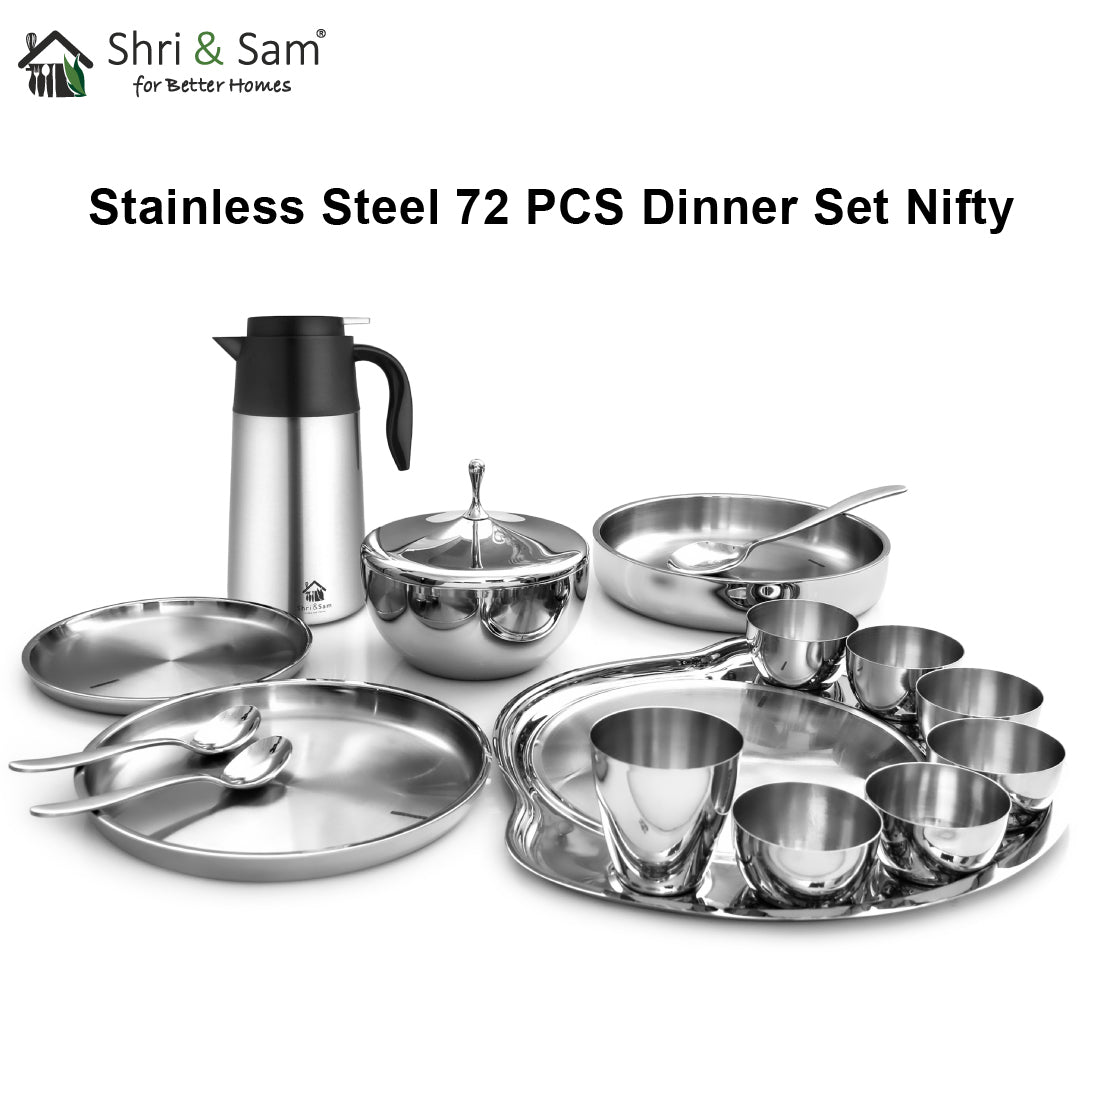 Stainless Steel 72 PCS Dinner Set (6 People) Nifty